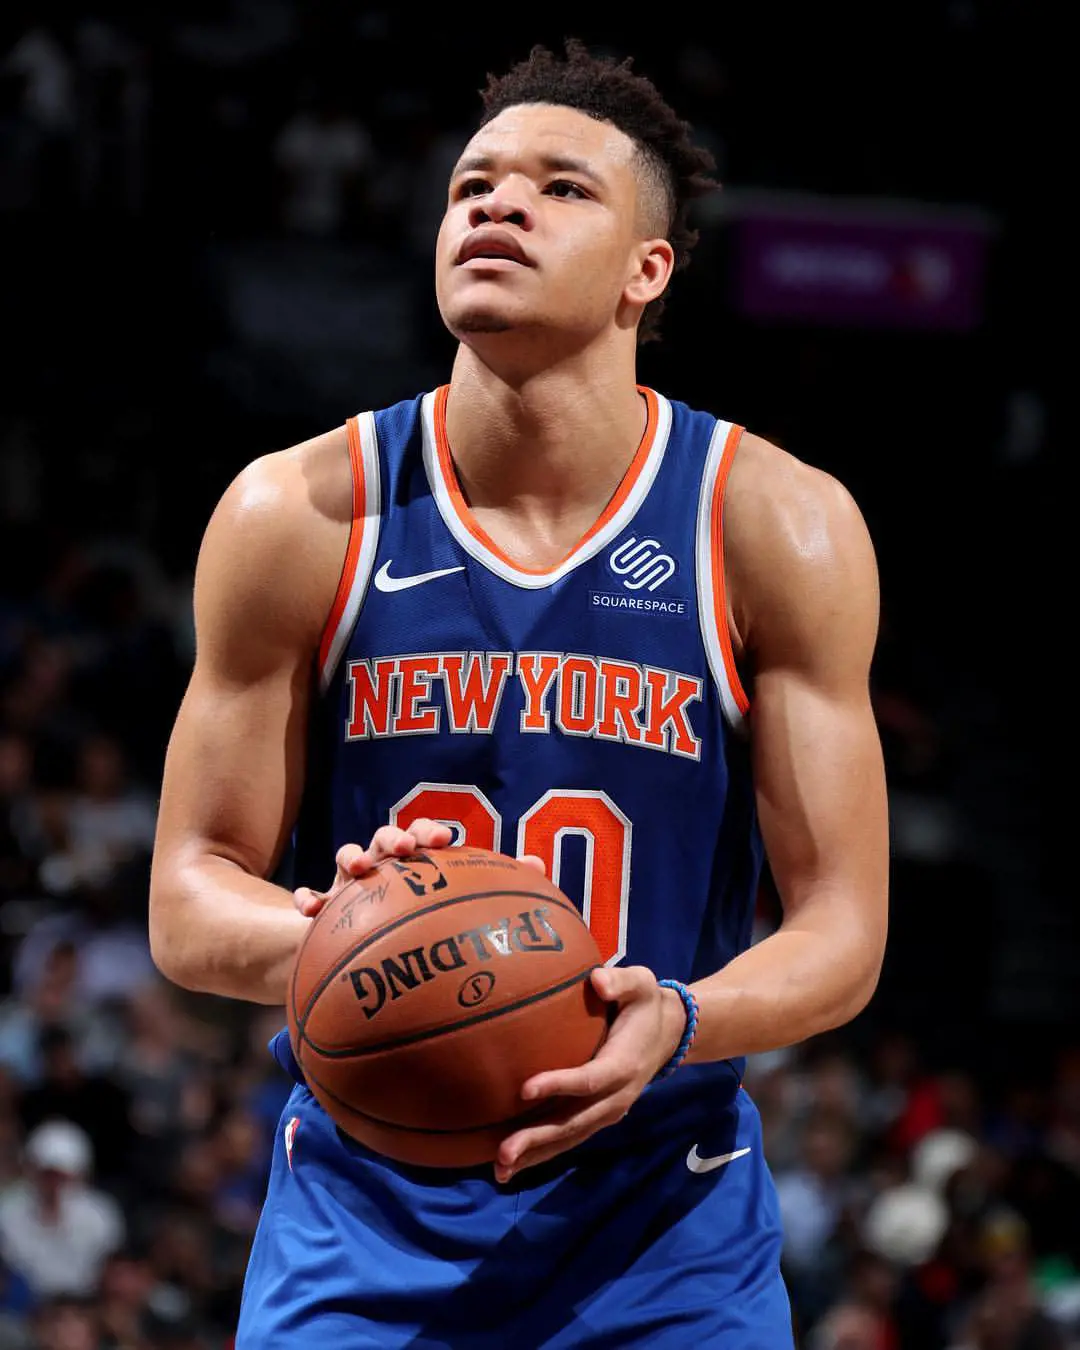 Kevin sets for a throw while playing for Knicks in October 2018